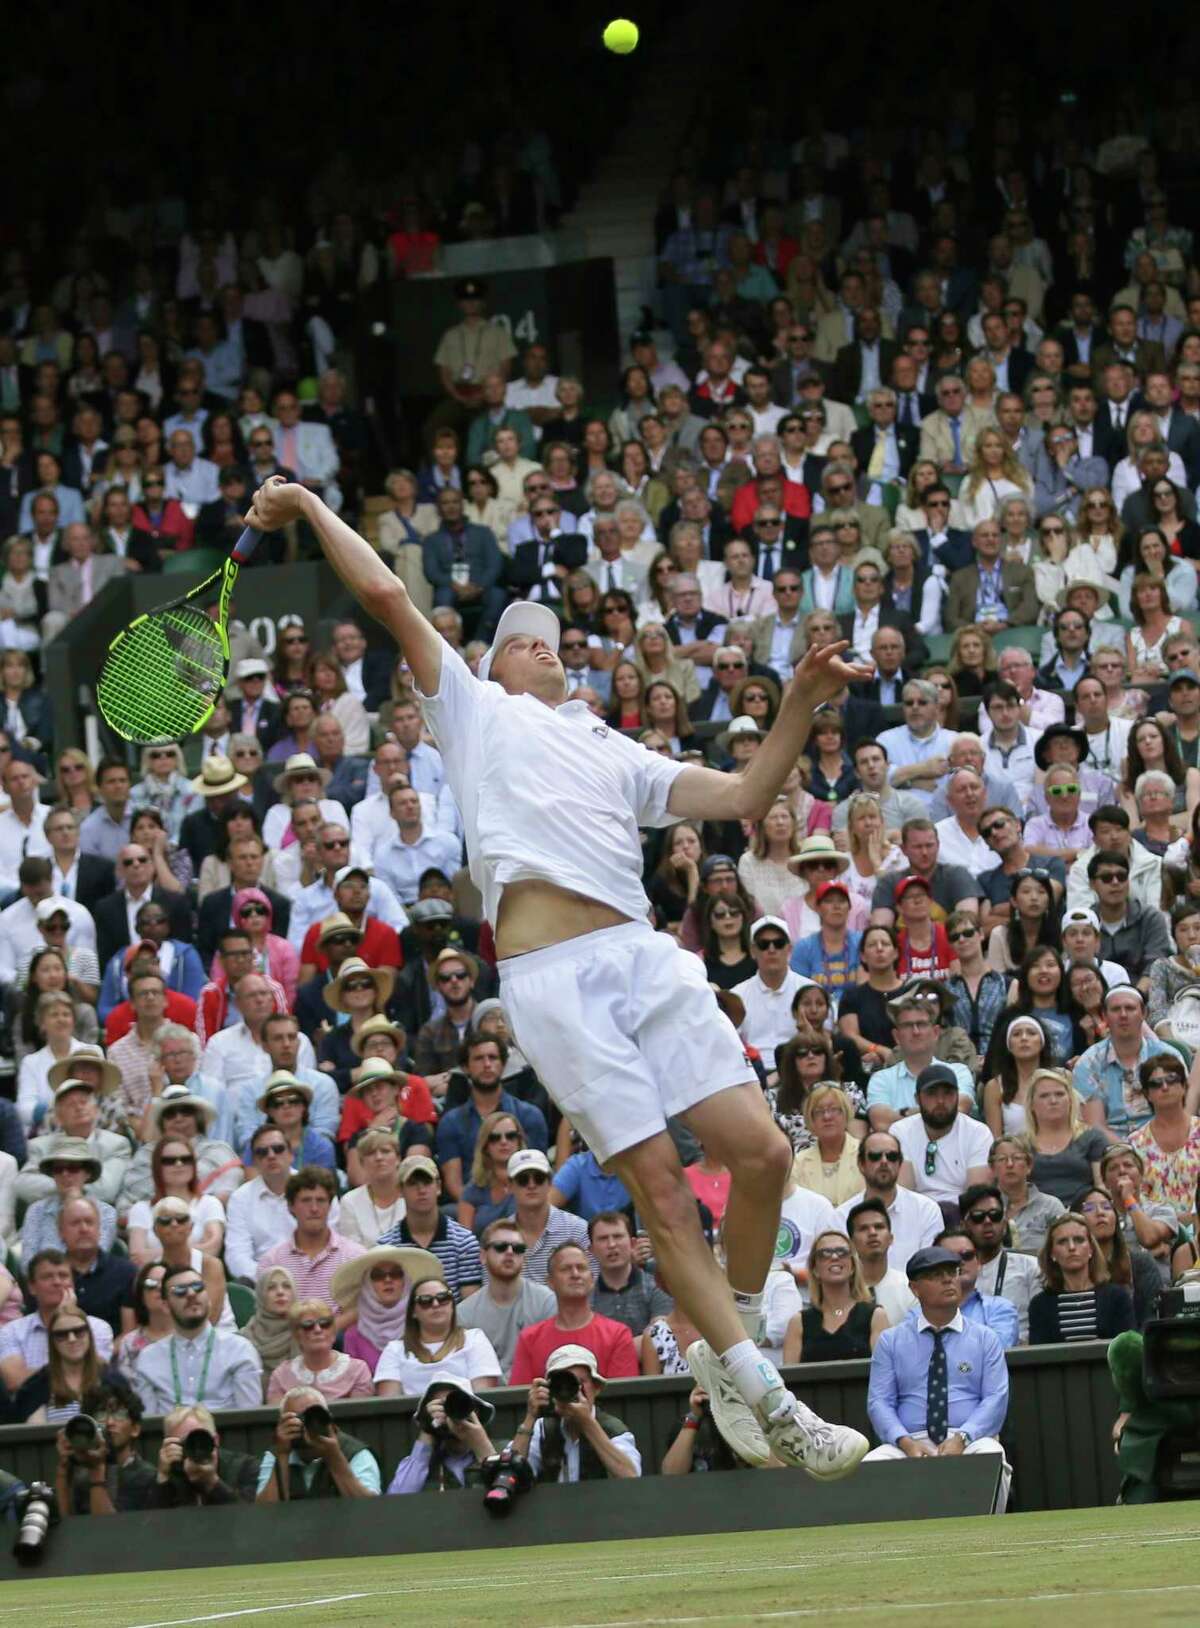 Sam Querrey of the United States smashes a winner against Britain's Andy Murray during their Men's Singles Quarterfinal Match on day nine at the Wimbledon Tennis Championships in London Wednesday, July 12, 2017. (AP Photo/Tim Ireland)